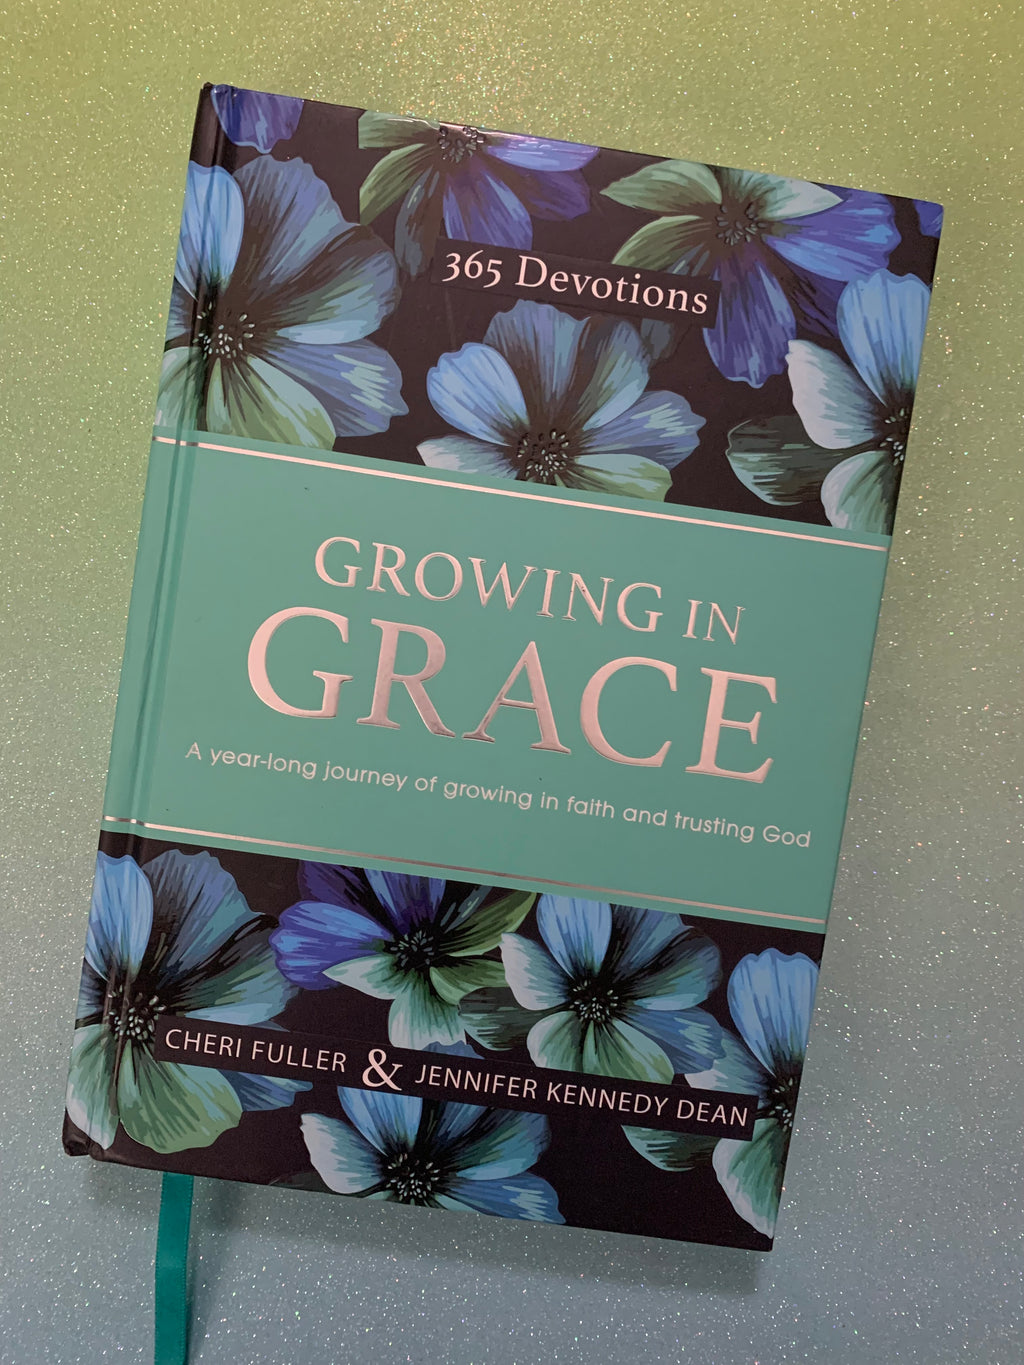 Growing in Grace: A Year-Long Journey of Growing in Faith and Trusting God- By Cheri Fuller & Jennifer Kennedy Dean